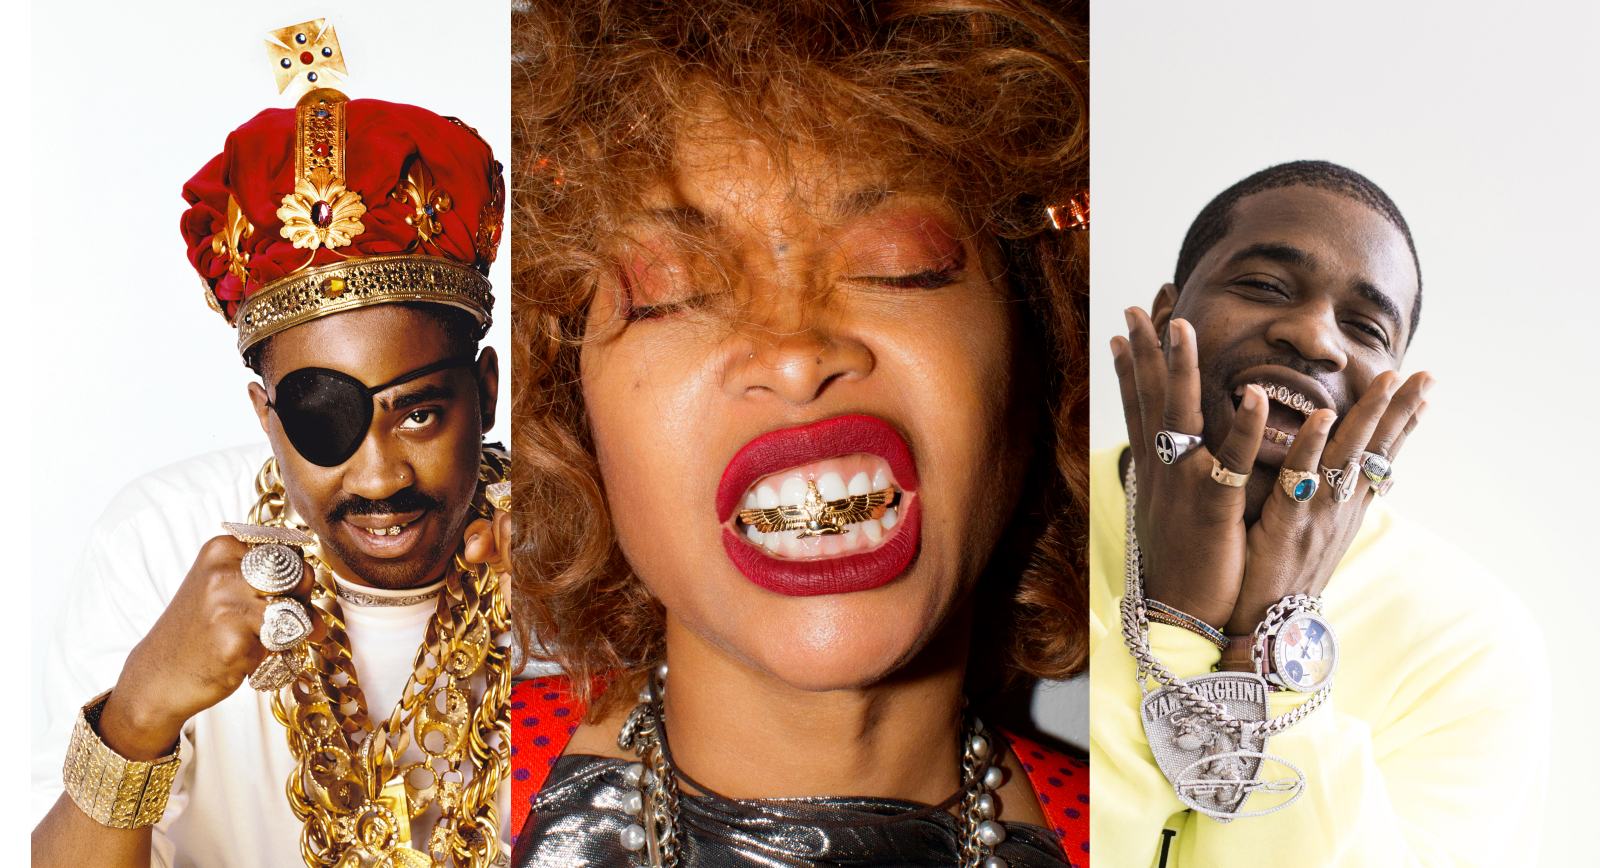 Ice Cold: An Exhibition of Hip-Hop Jewelry will present pieces worn by (from left to right) Slick Rick, Erykah Badu and FERG. 